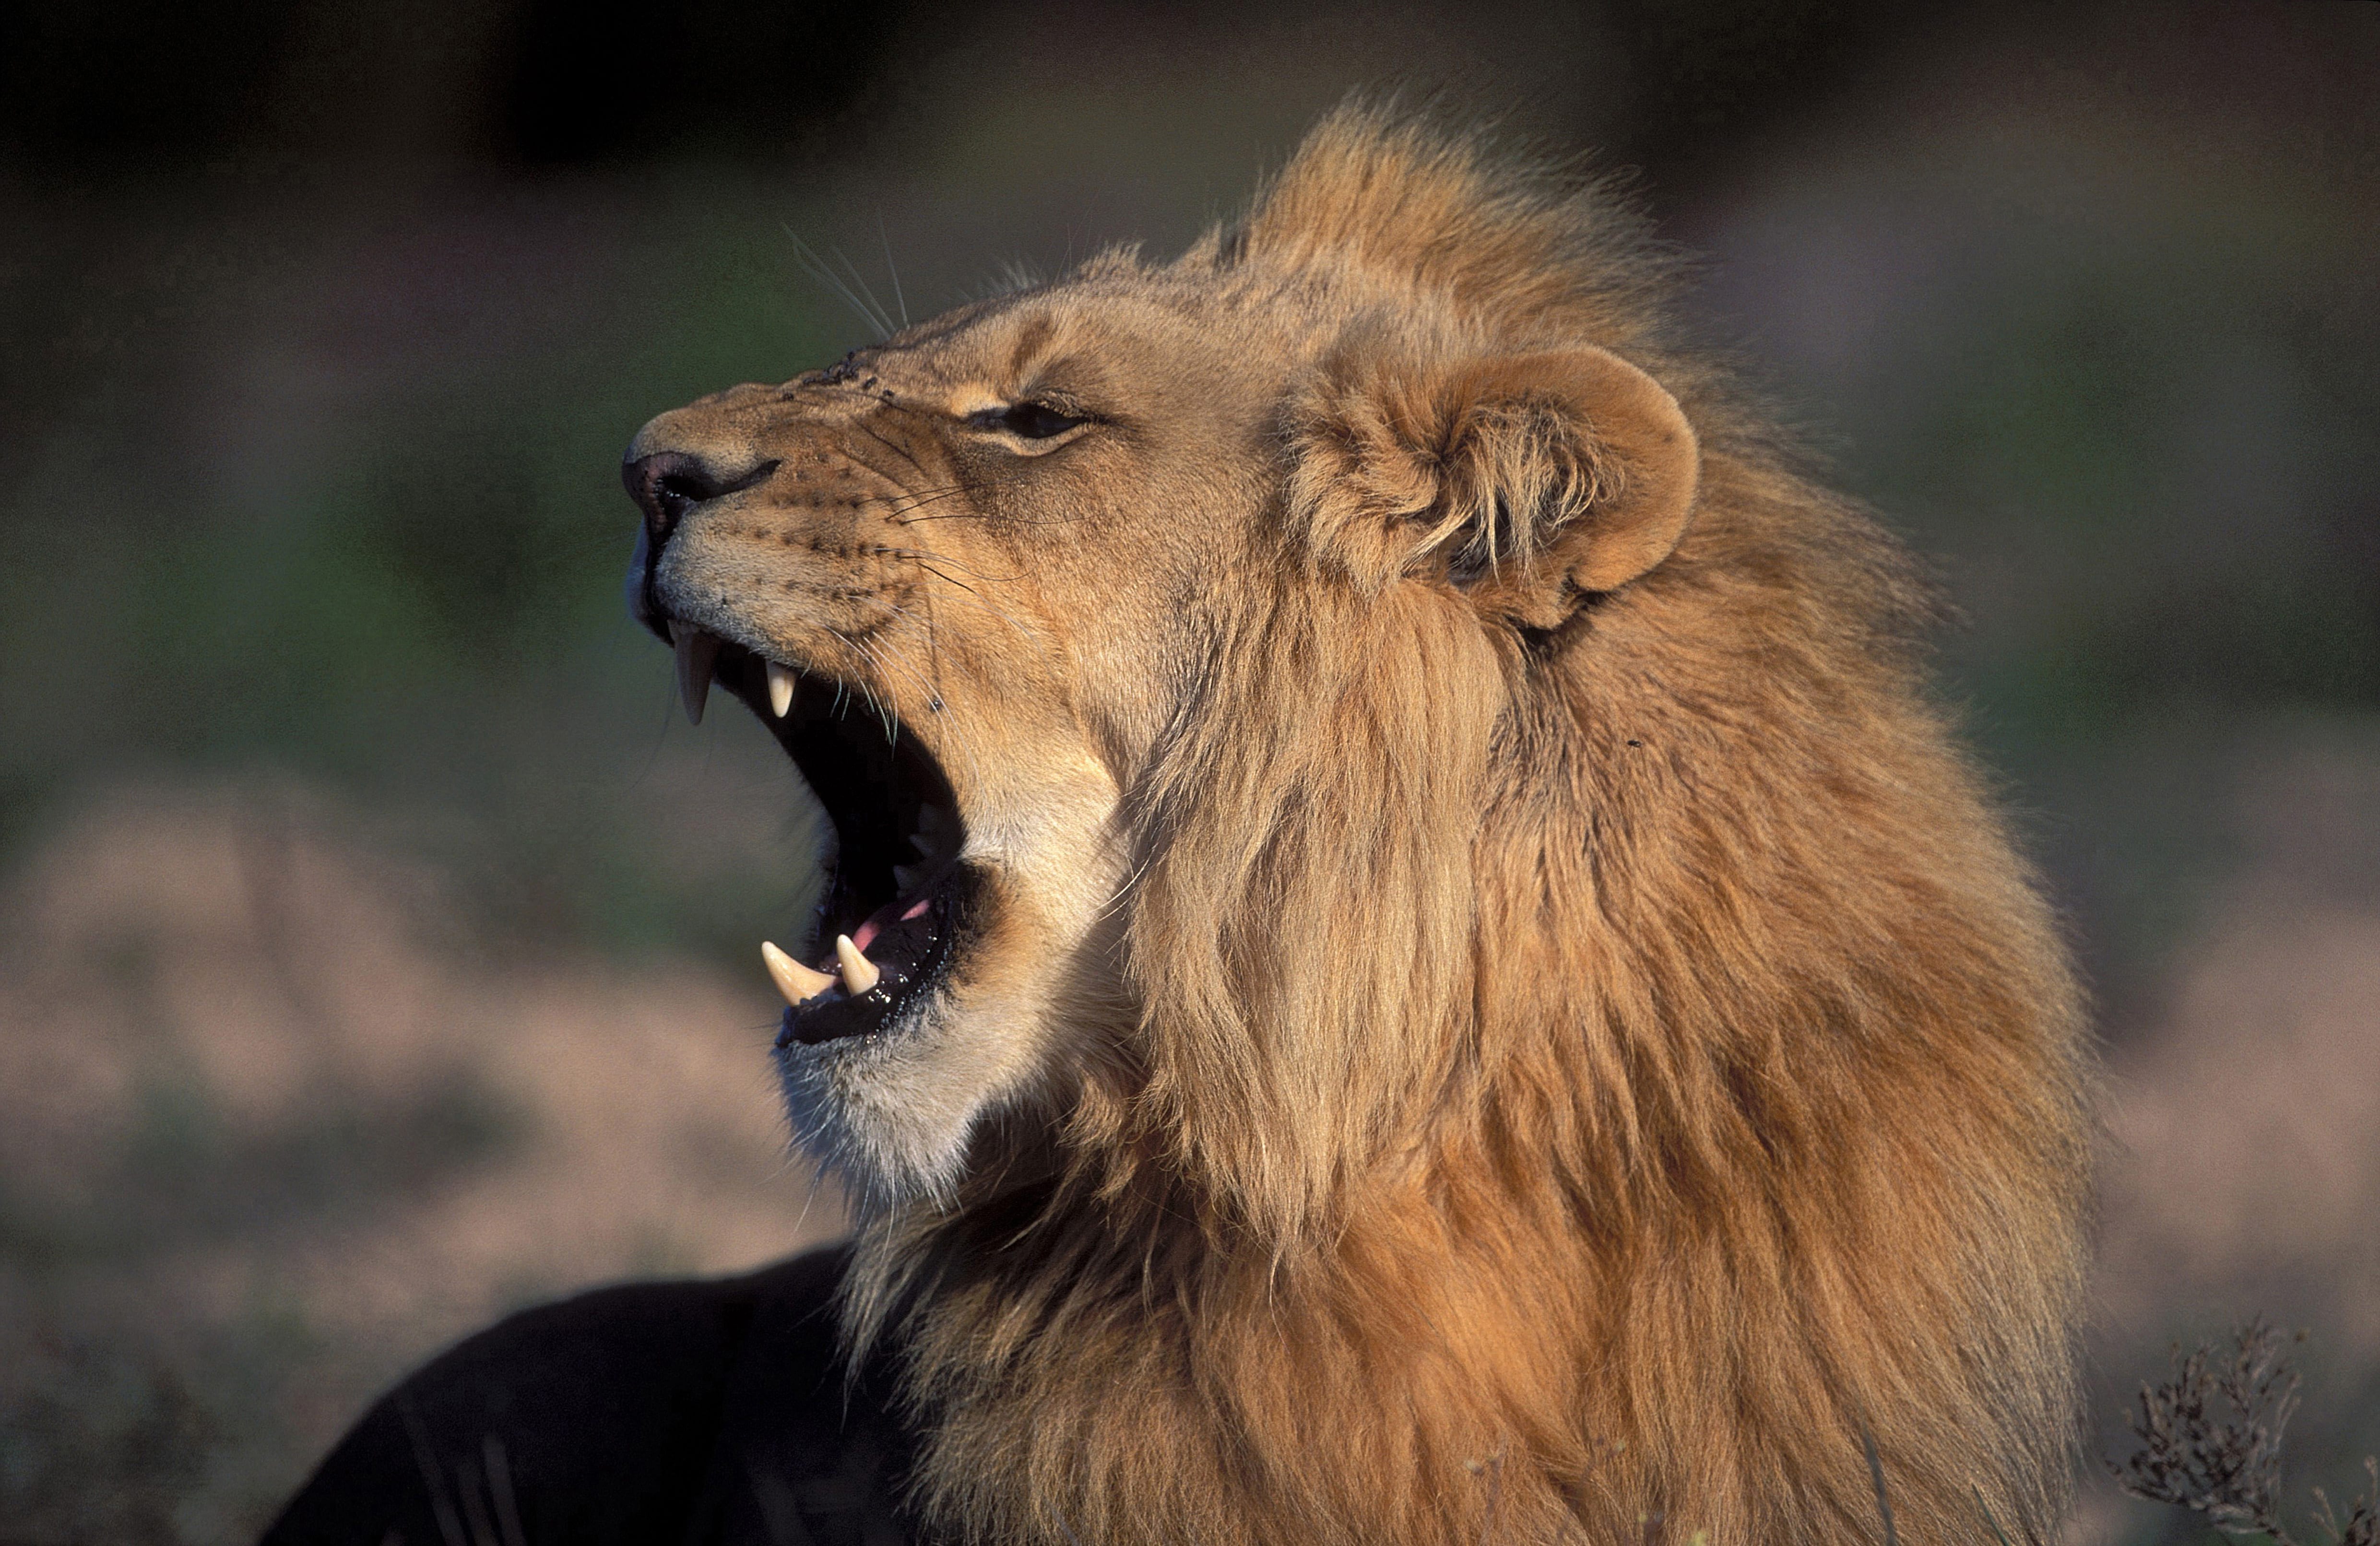 A Male lion yawning widely (00010651)